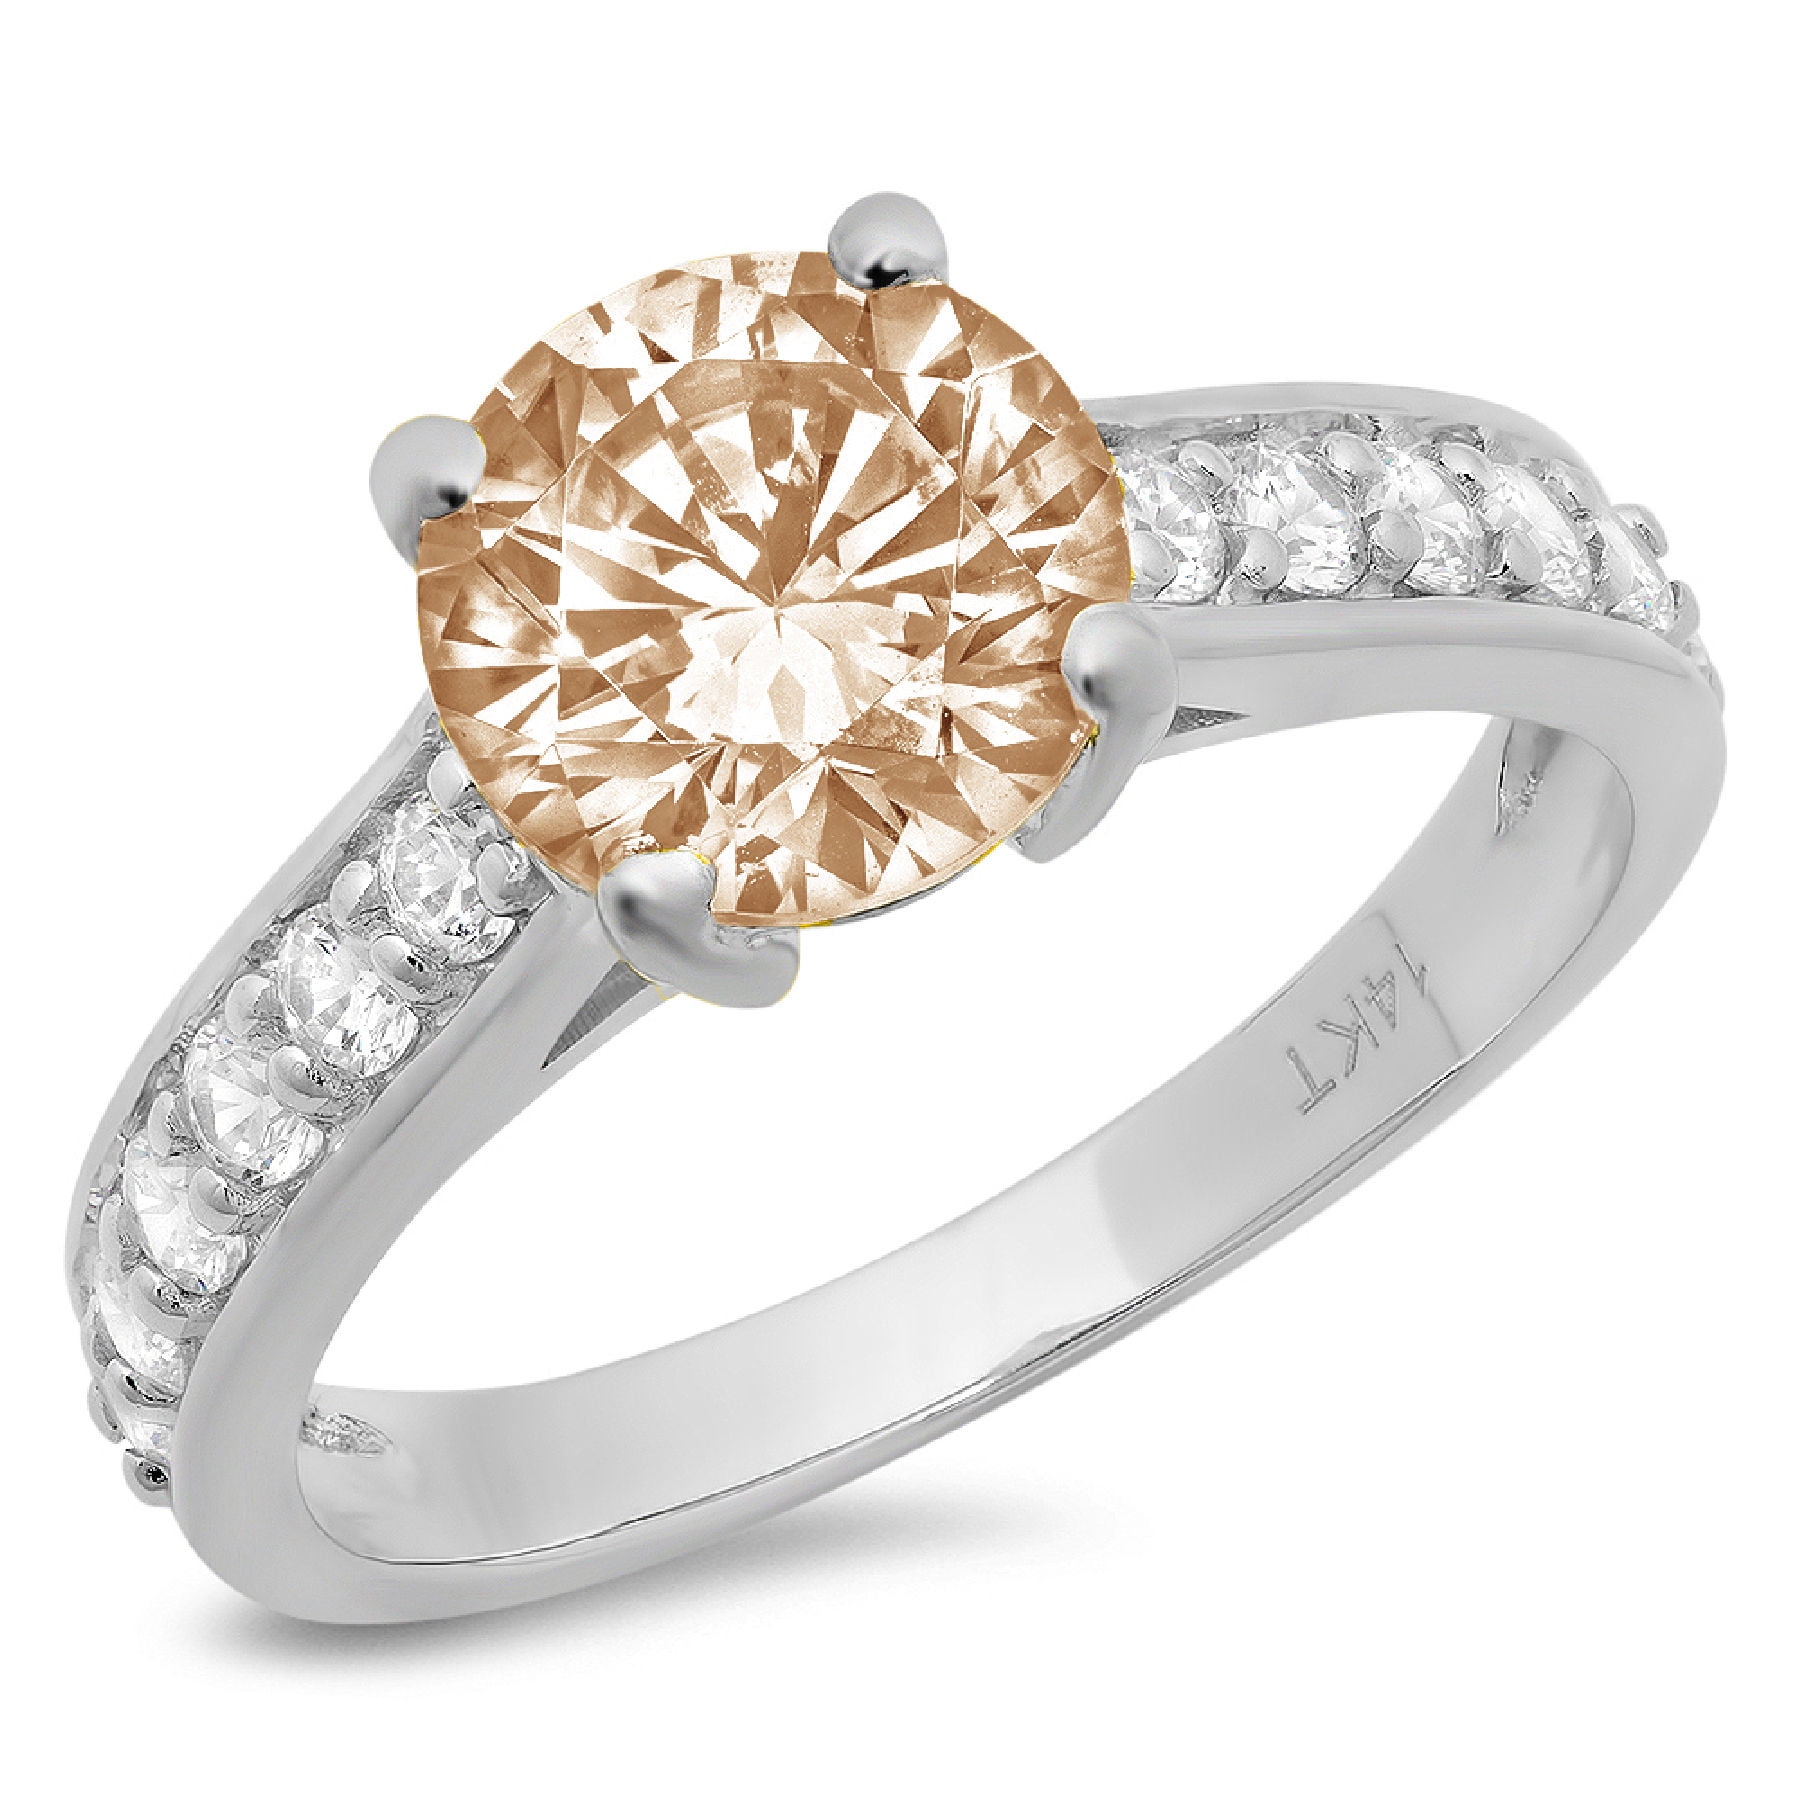 Details about   1.50 CT Round Cut Solitaire VVS1 Diamond Enhancer Band Ring 14K White Gold Over